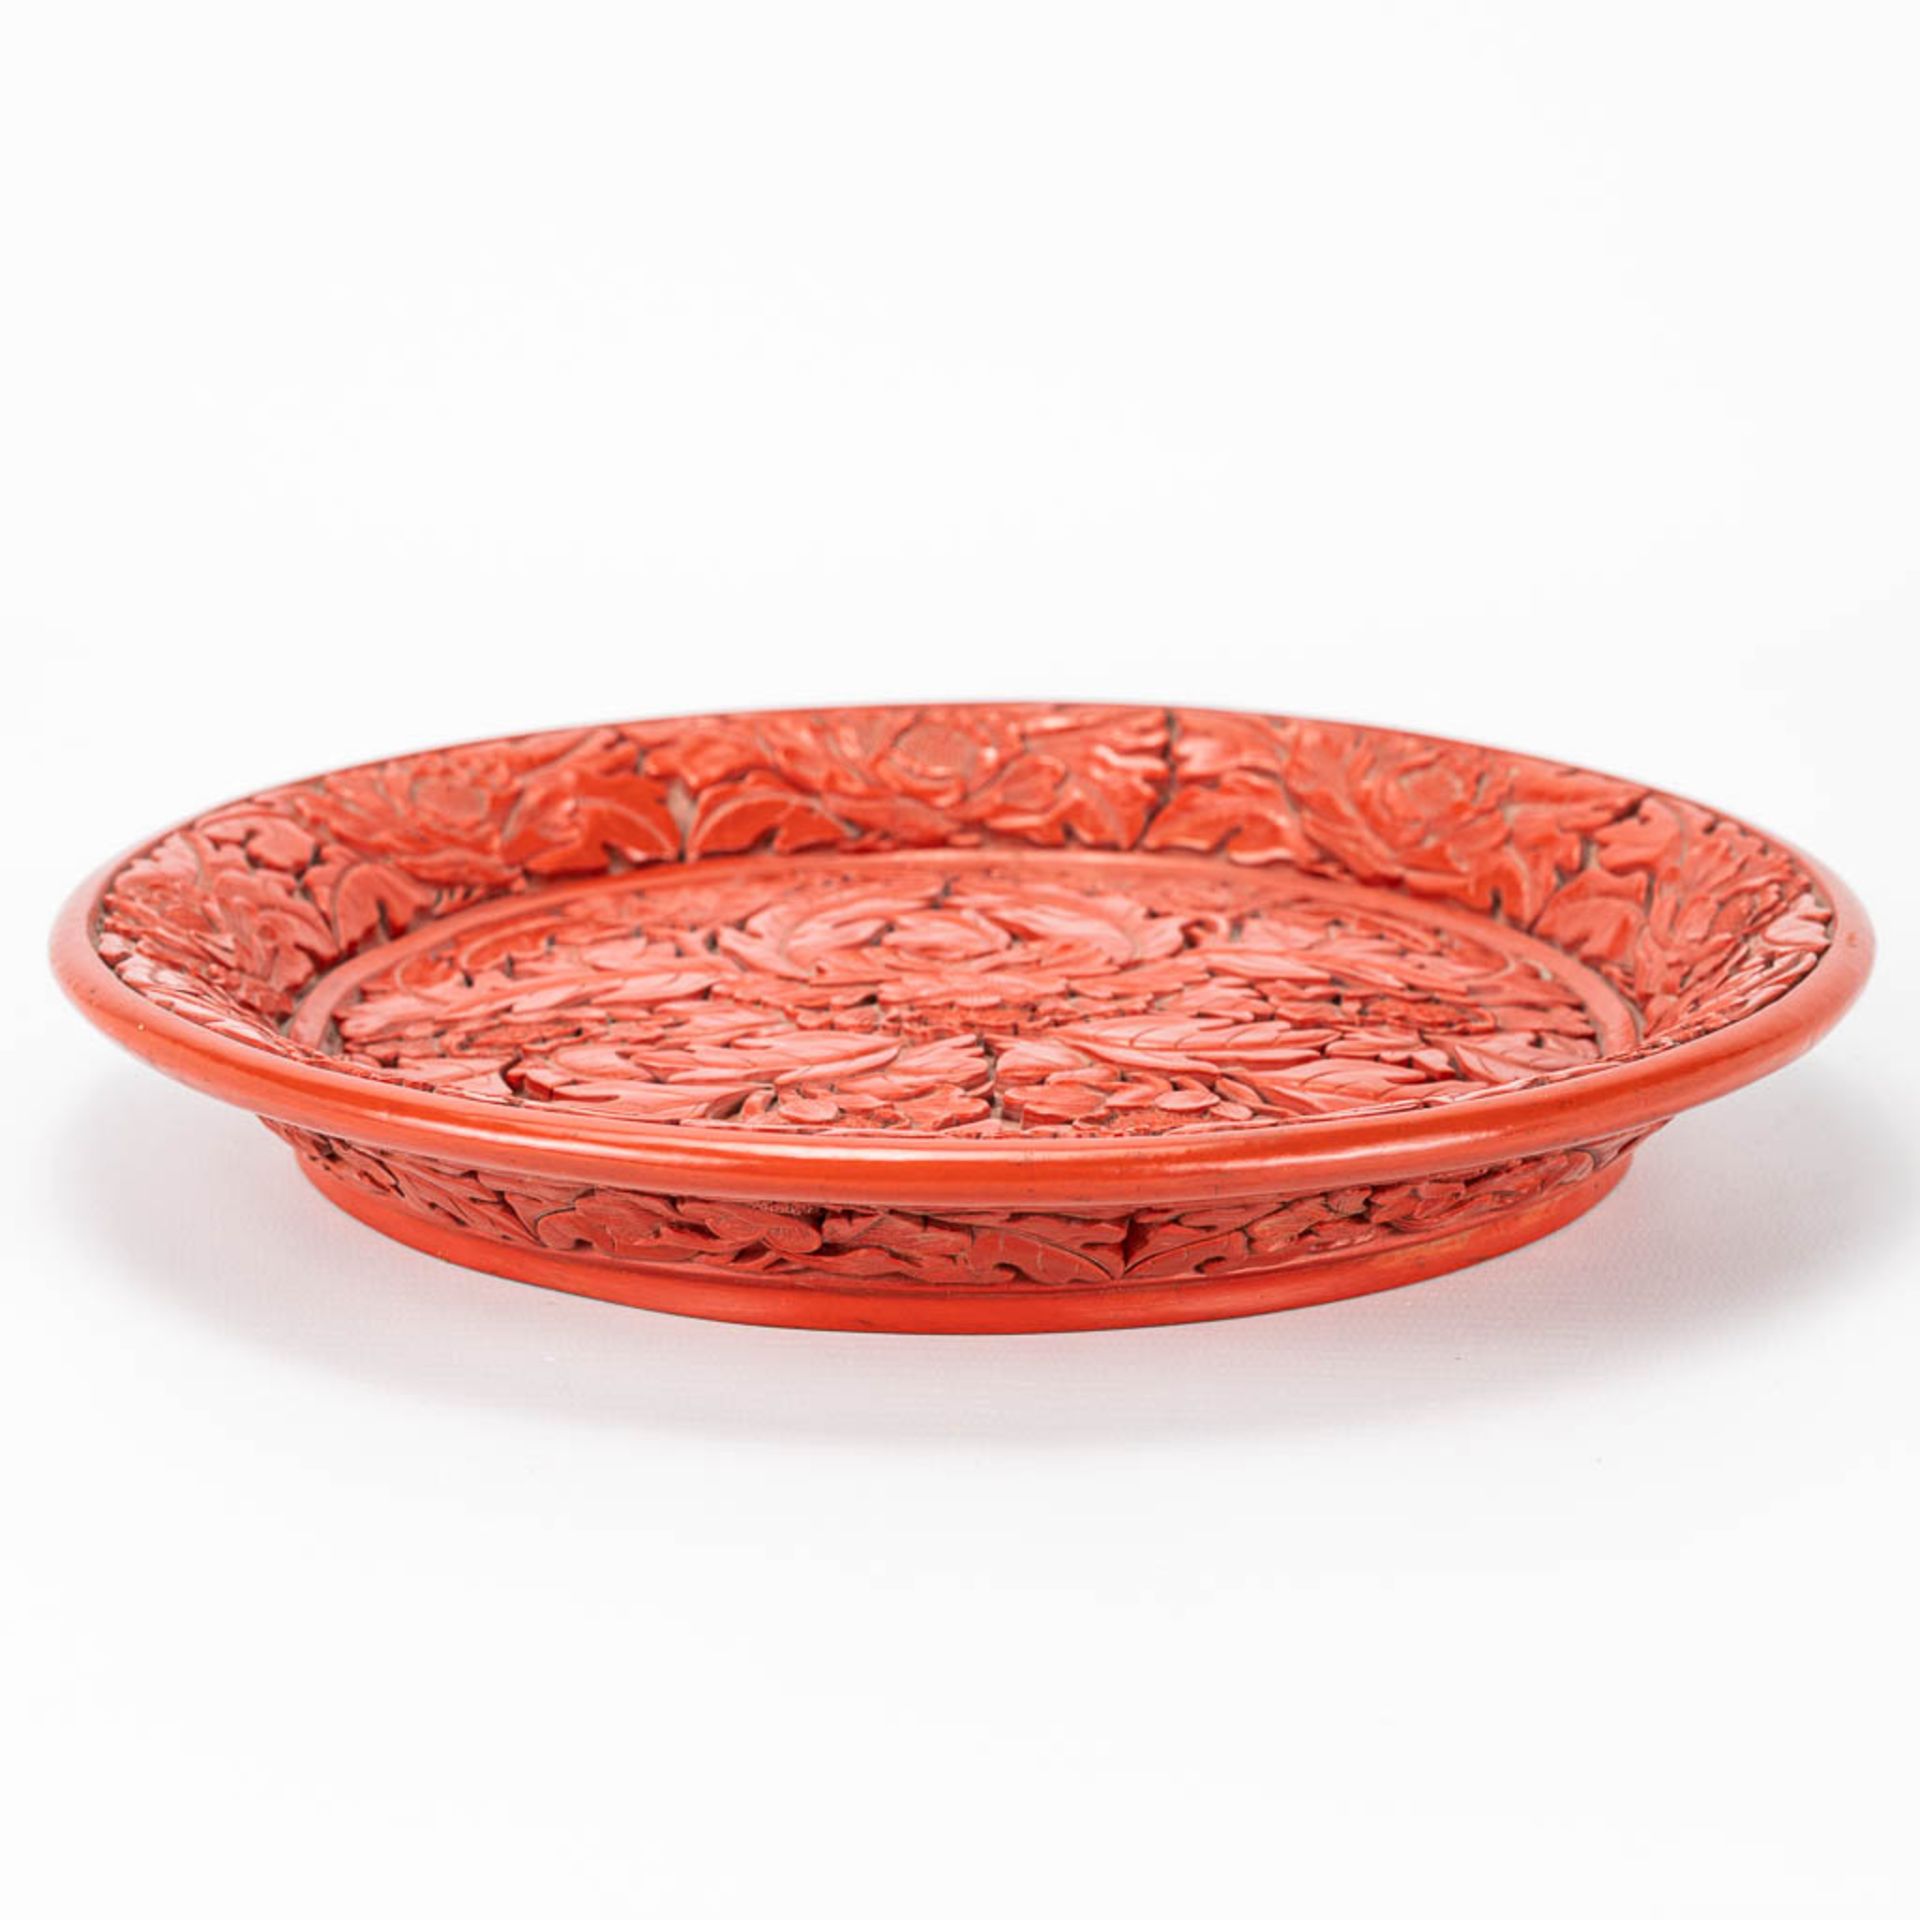 A plate made of lacquered cinnabar and made in China. - Image 4 of 10